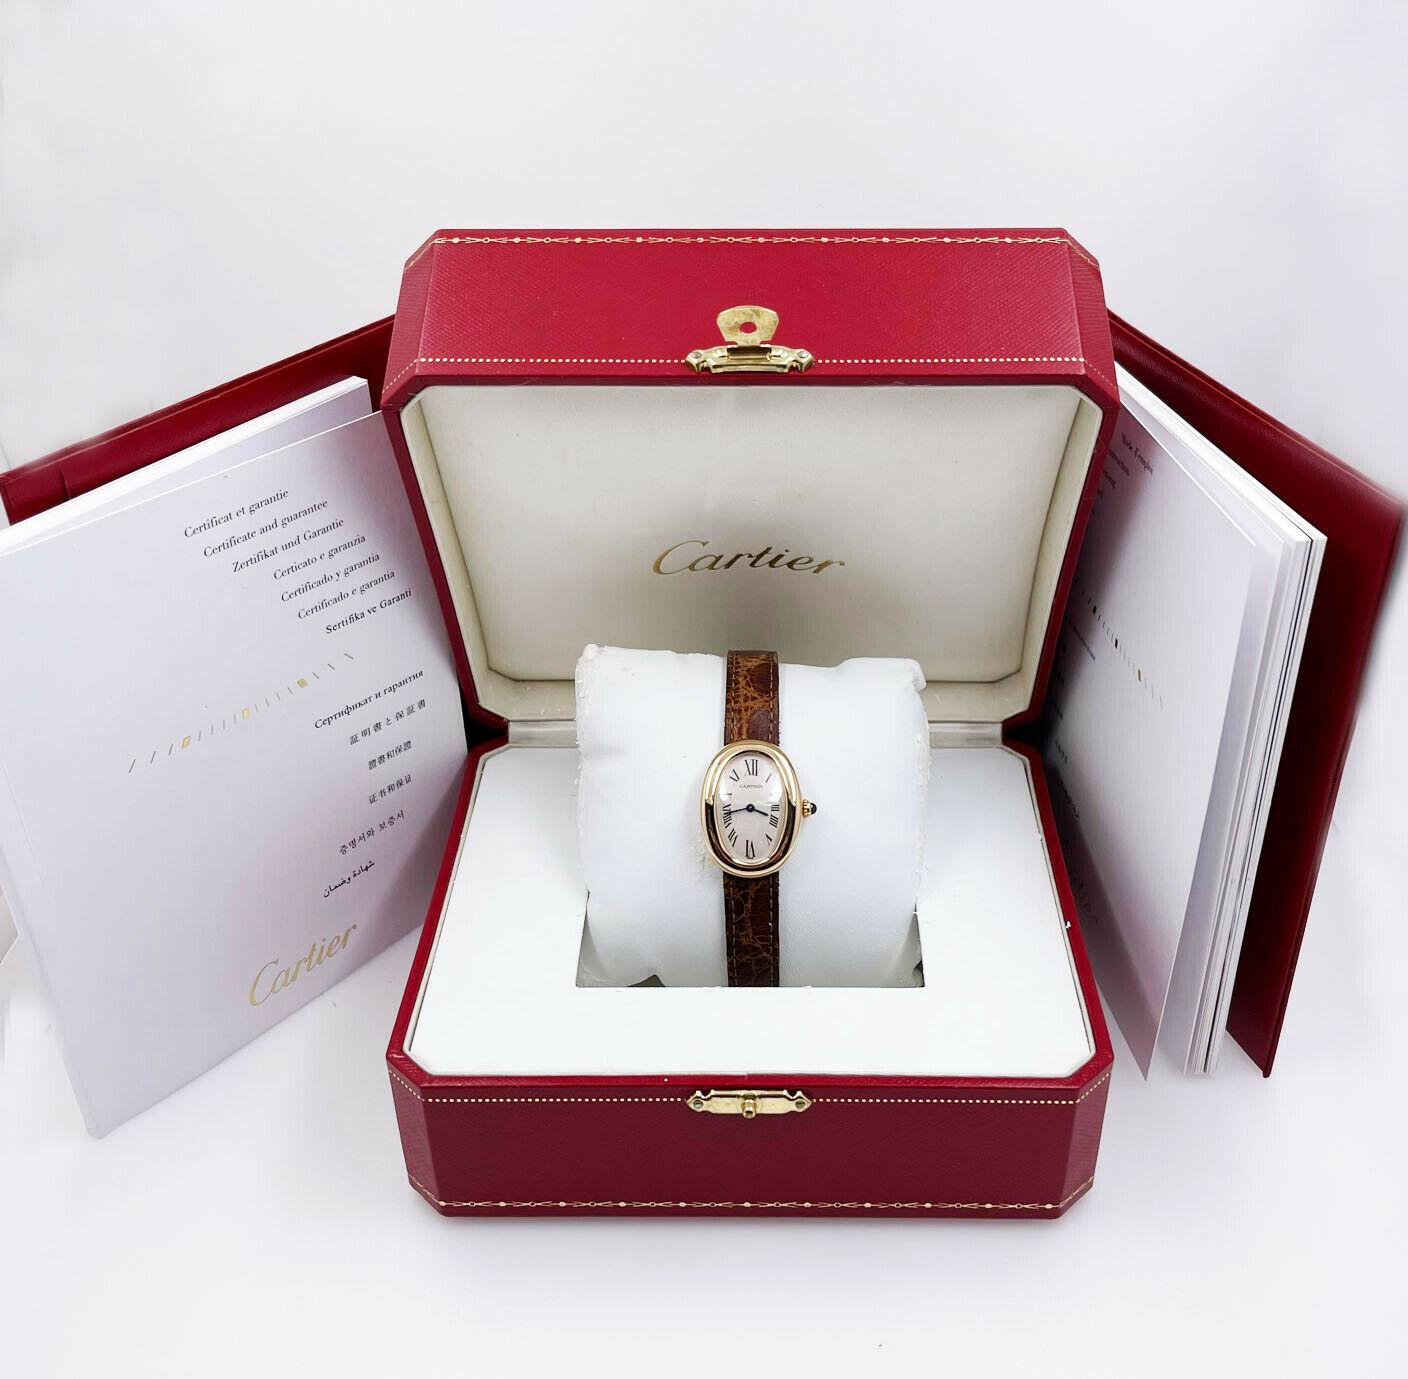 Reference Number: 1954



Year: 2010

 

Model: Baignoire

 

Case Material: 18K Yellow Gold

 

Band: Brown Leather Band

 

Bezel:  18K Yellow Gold

 

Dial: Ivory 

 

Face: Sapphire Crystal 

 

Case Size: 31mm x 22mm

 

Includes: 

-Cartier